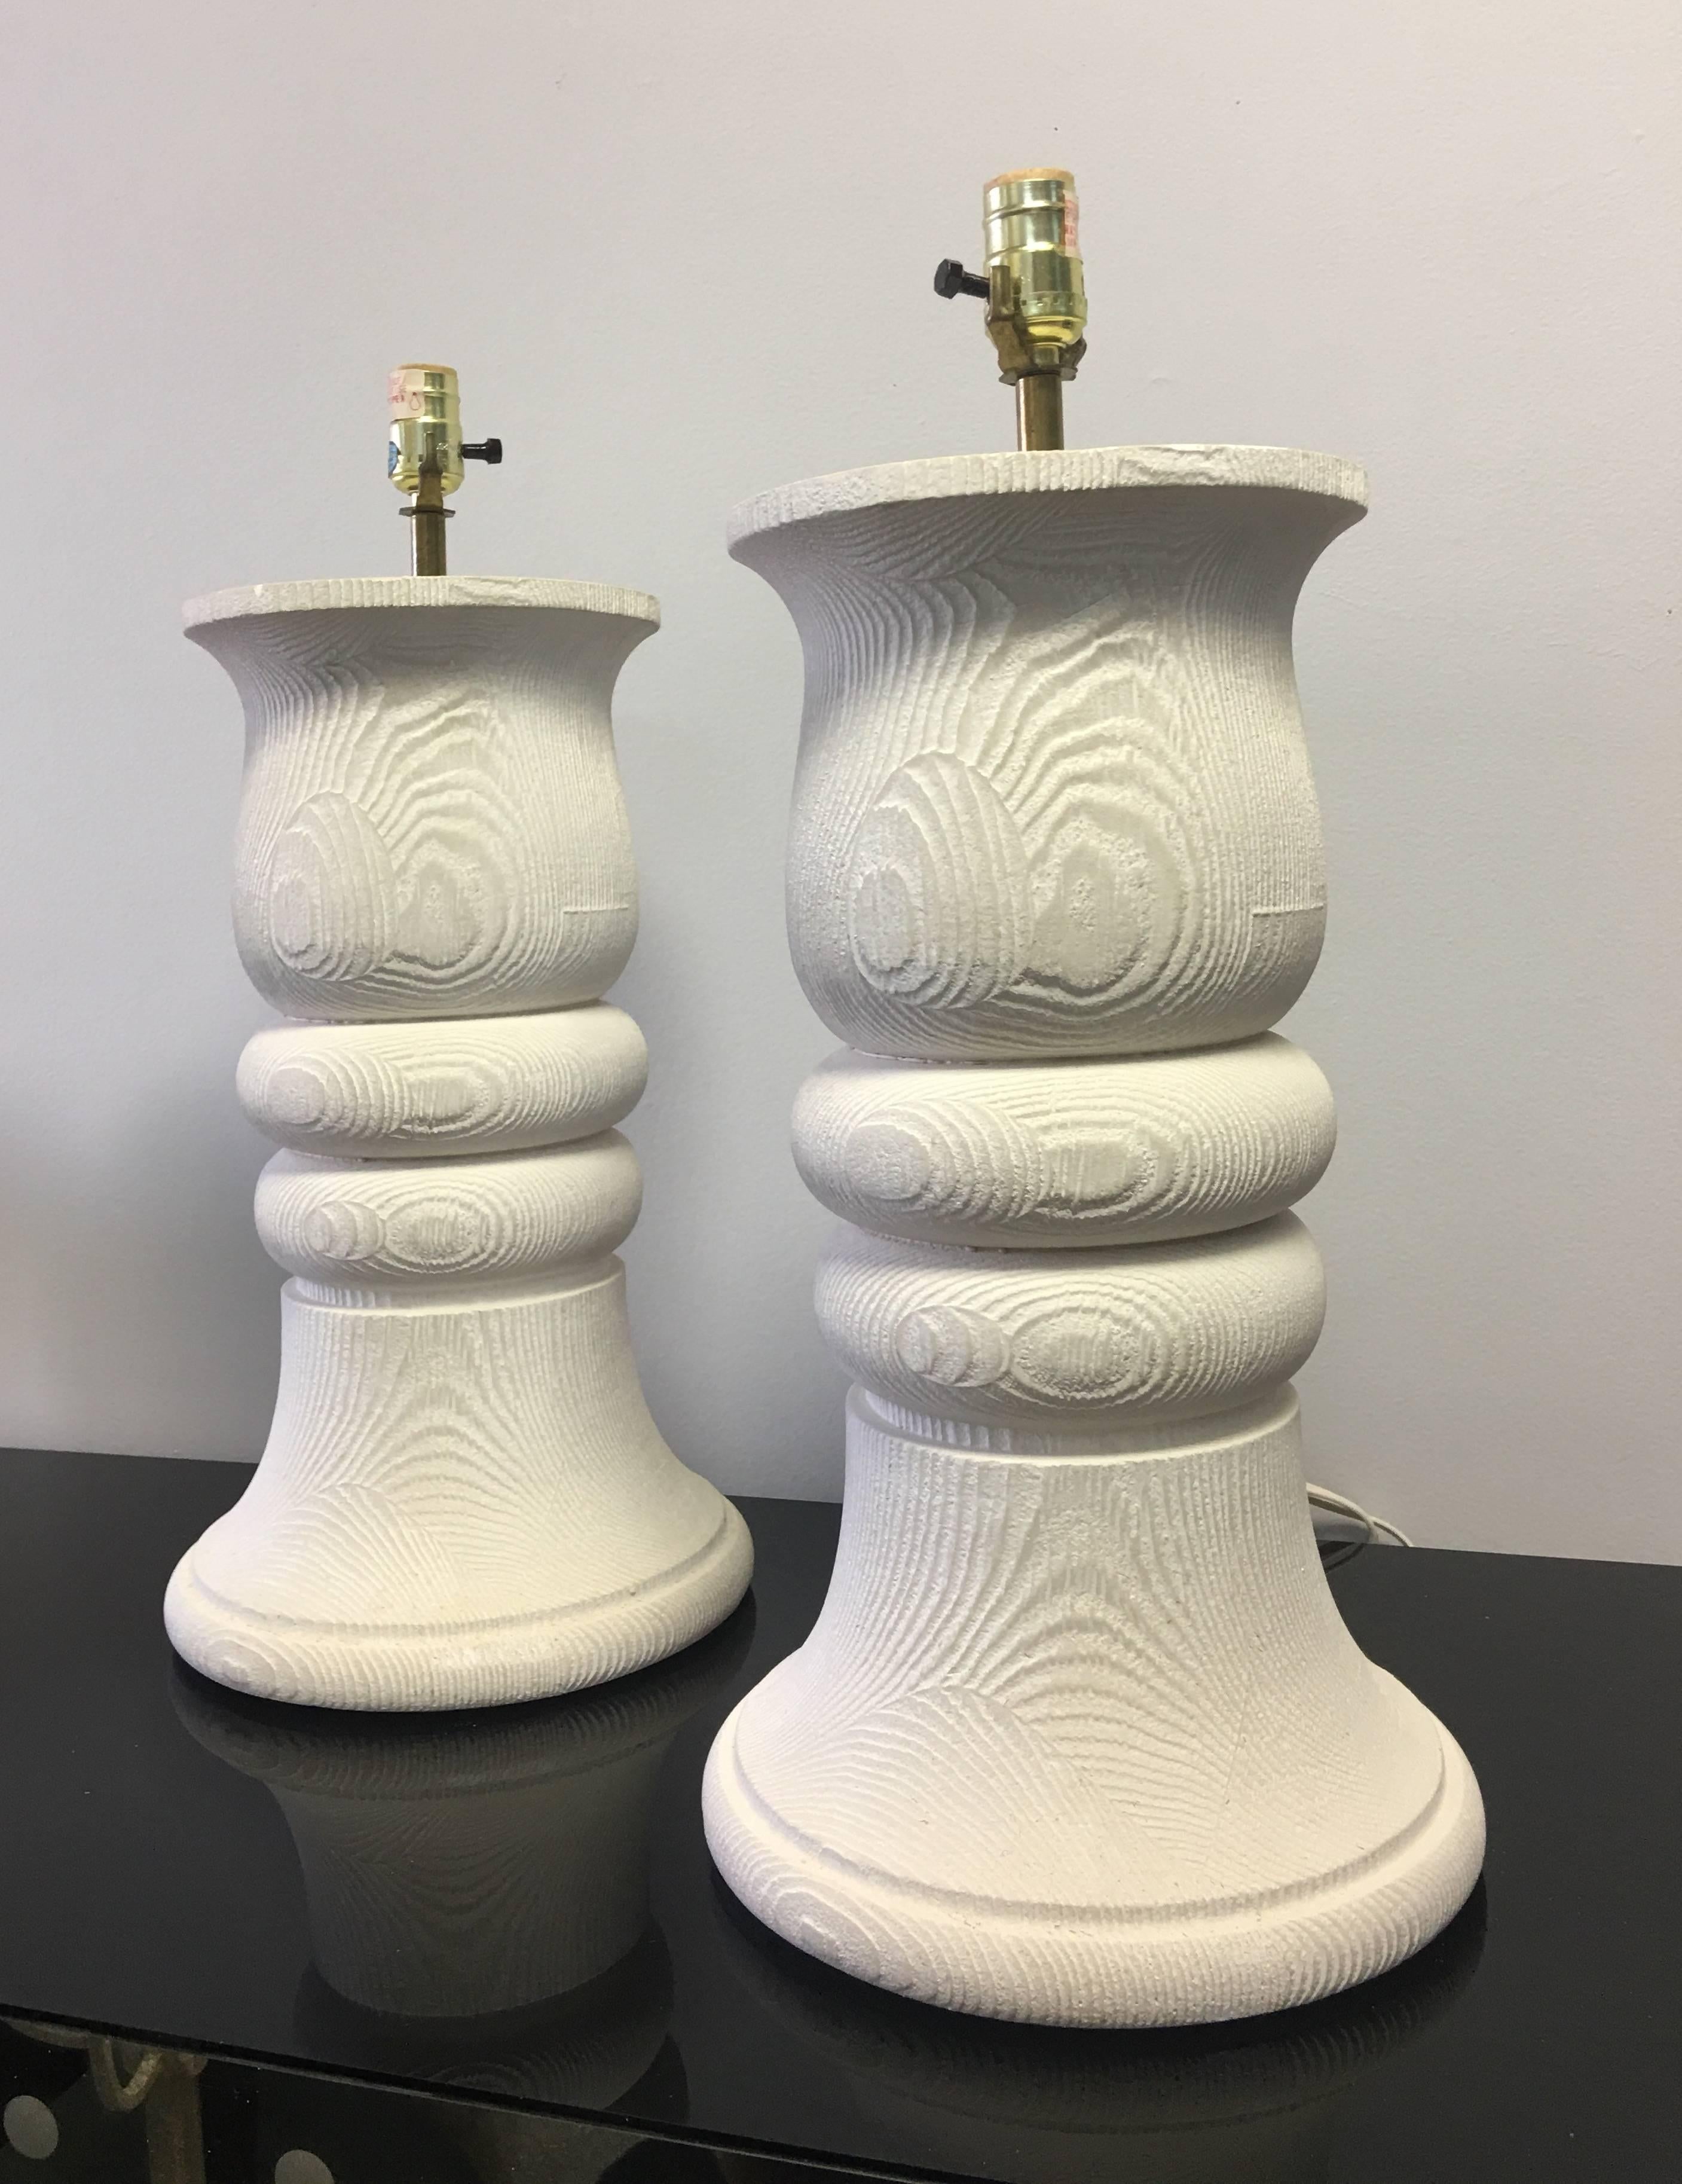 Large pair of plaster lamps. These are done in the surrealist style of John Dickinson. Substantial baluster shape with oak grain texture. Original molded finish, these lamps have not been re-coated and retain all the original detail.